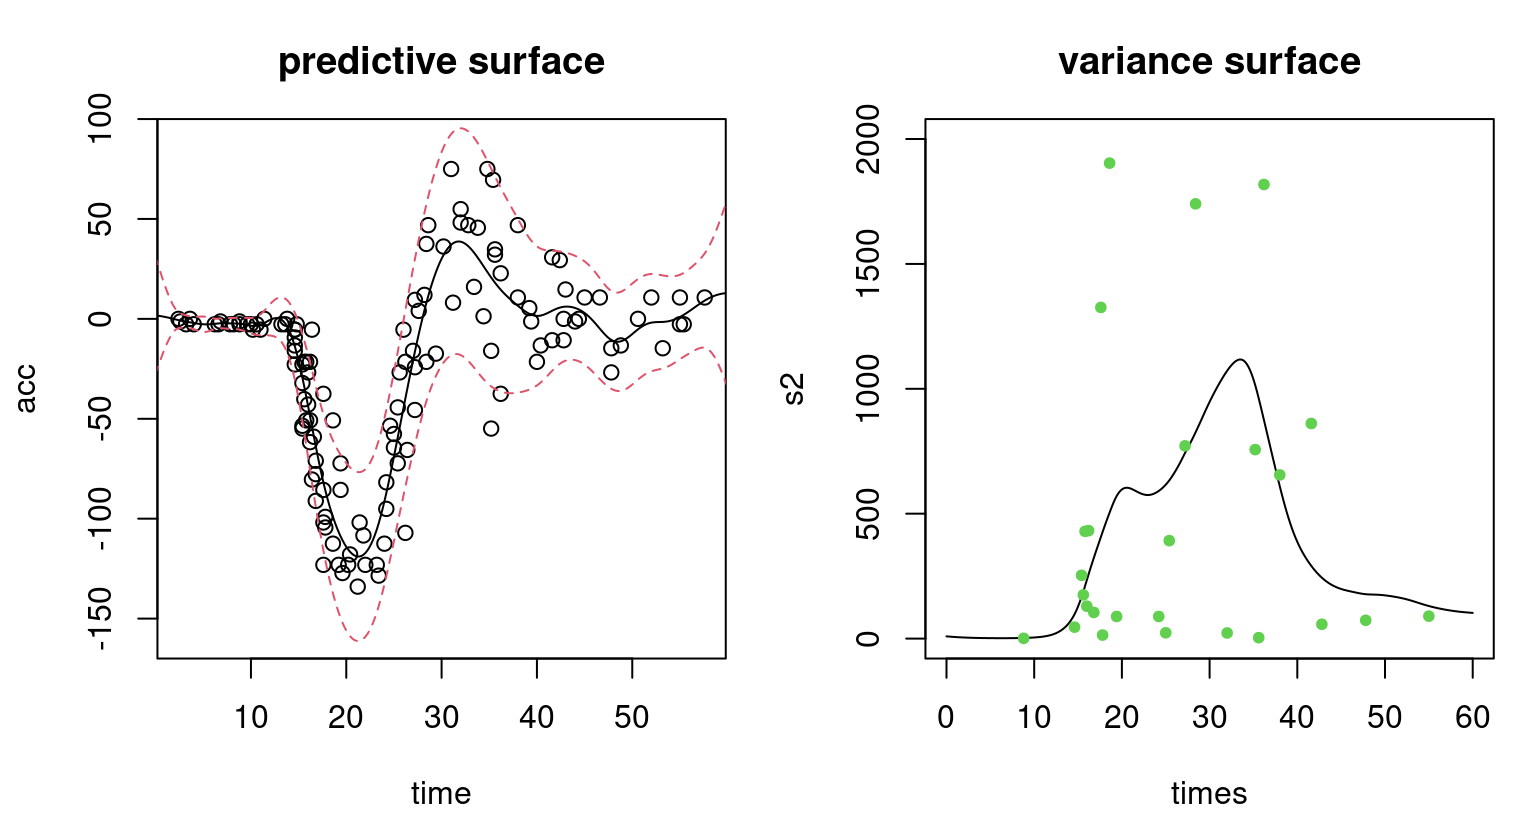 Heteroskedastic GP fit to the motorcycle data. Left panel shows the predictive distribution via mean (solid-black) and 90% error-bars (dashed-red); compare to Figure 10.2. Right panel shows the estimated variance surface and moment-based estimates of variance (green dots).